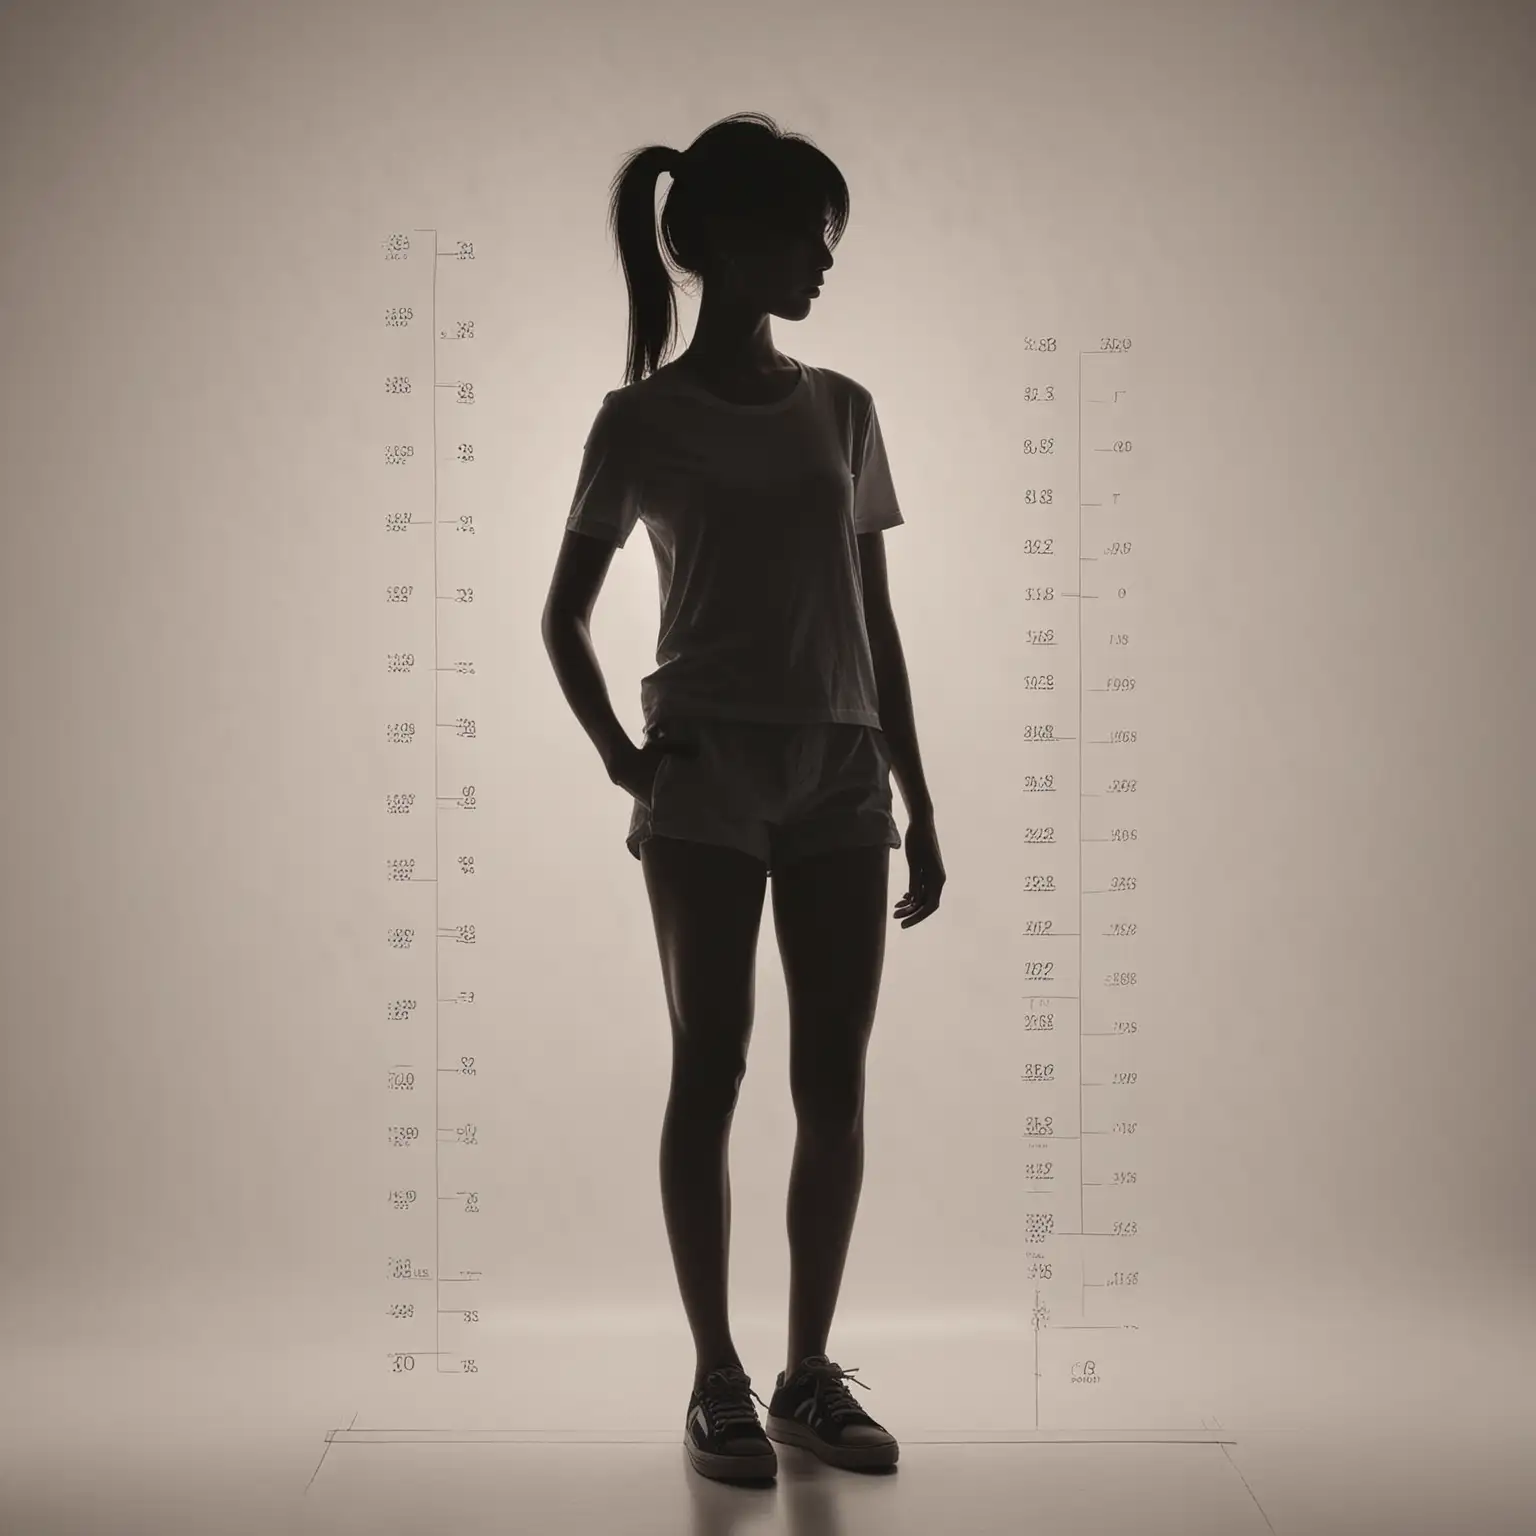 Female Silhouette Standing with Height Chart